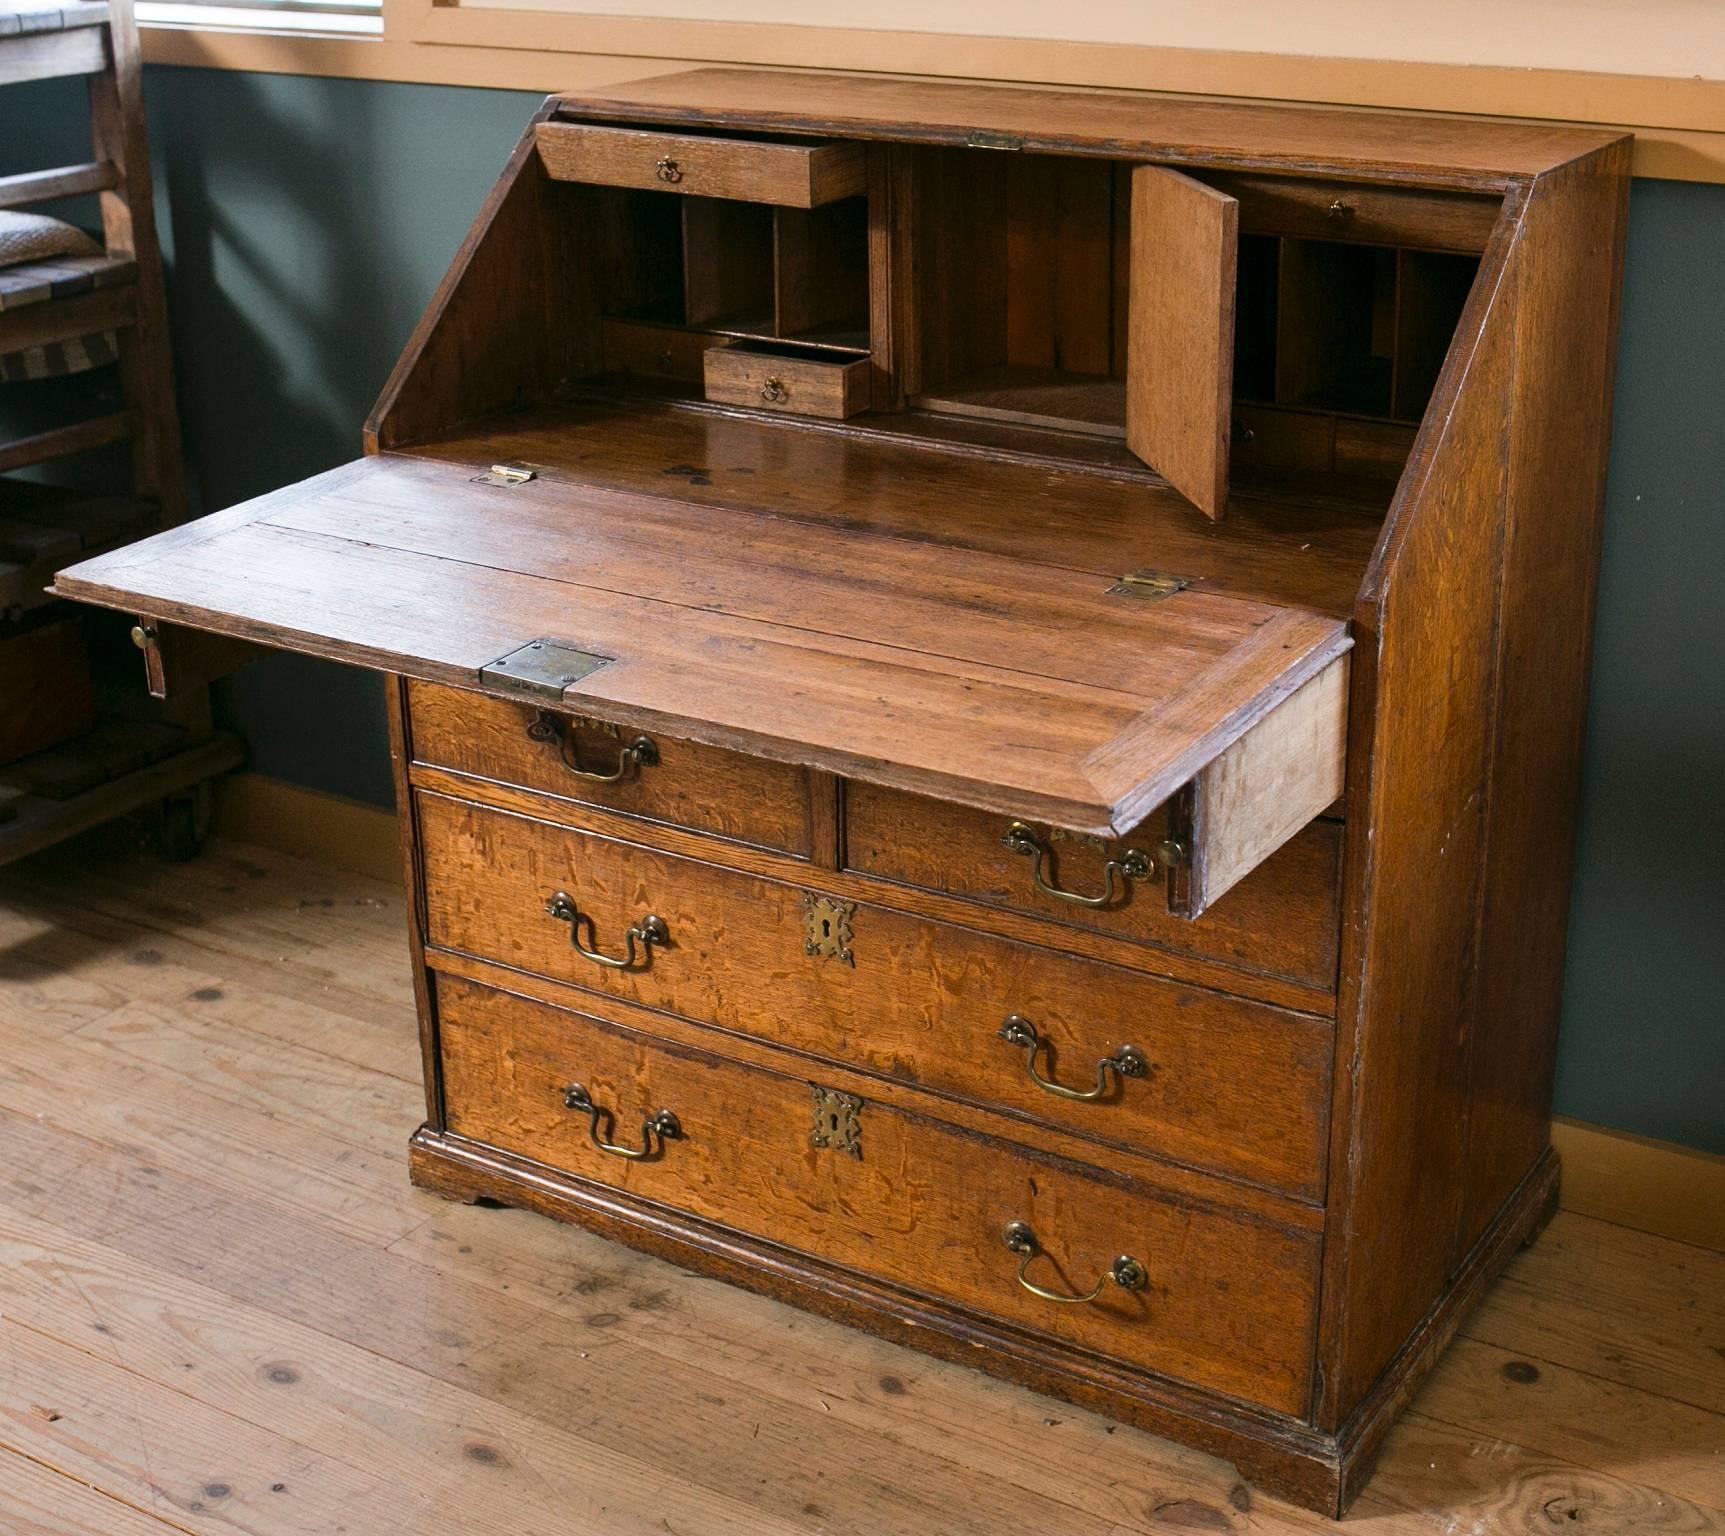 Writing desk from France, circa 1870. Features six larger drawers on the bottom and six small drawers inside the desk compartment. Three pigeon hole slotted areas and a main compartment also featured inside the desk area. Has two pull-out support